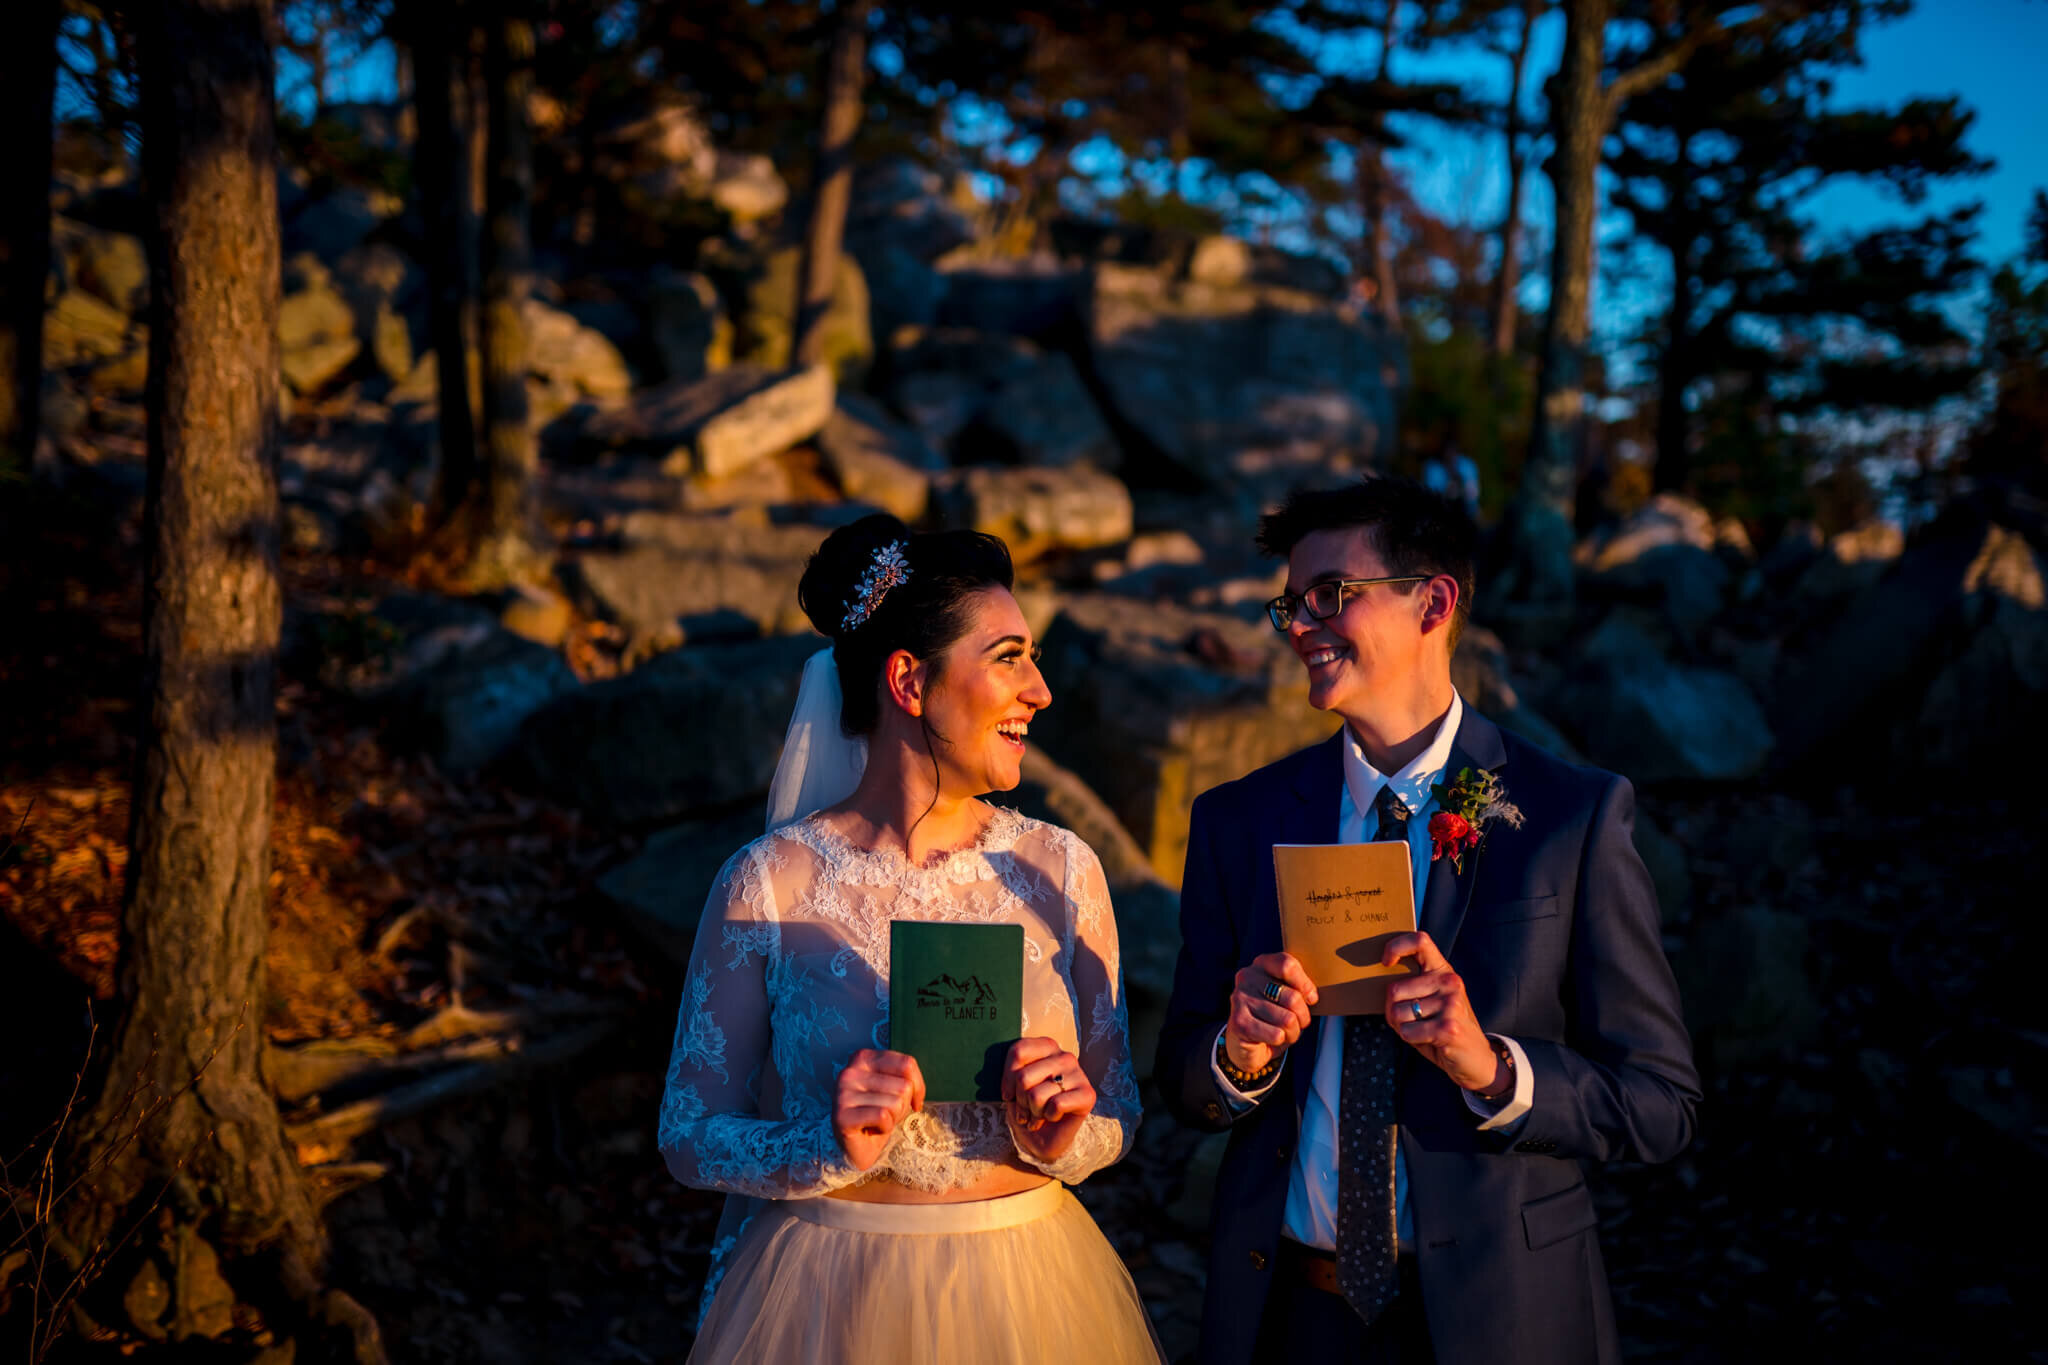 02-Ayla-Lee-Sugarloaf-Mountain-Elopement-Autumn-Summit-Wedding-Ceremony-Photography-by-Bee-Two-Sweet-101.jpg